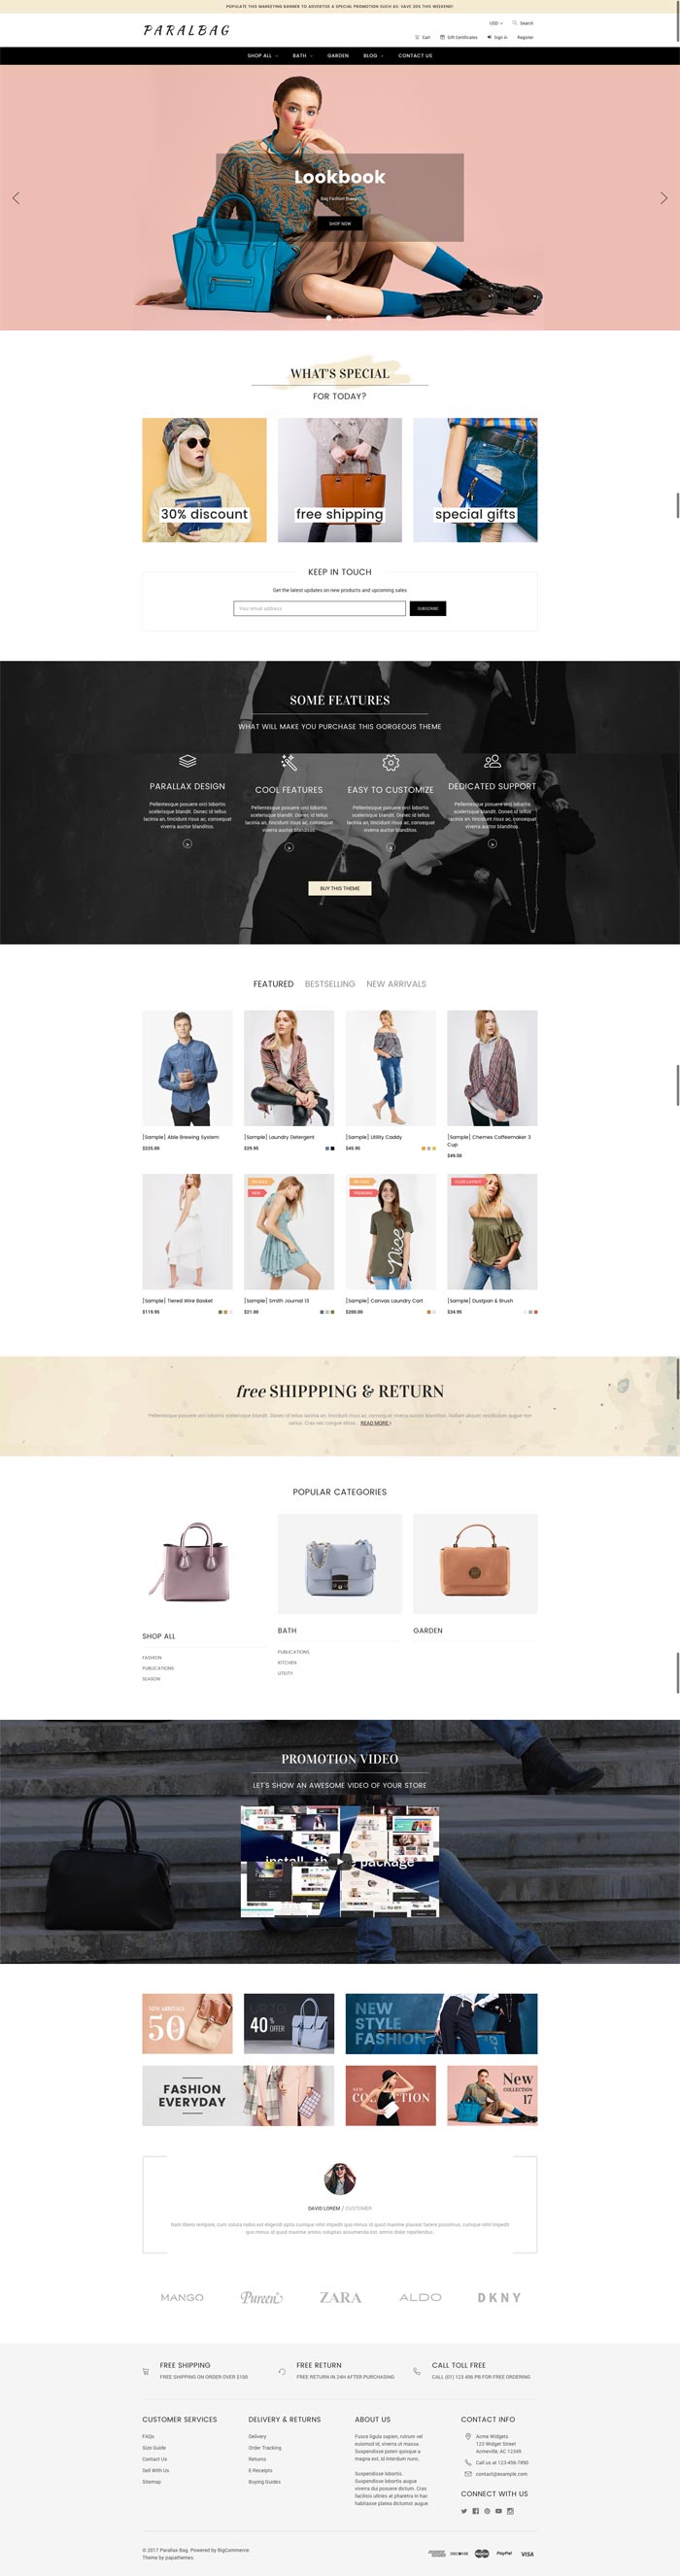 Homepage of Default Style